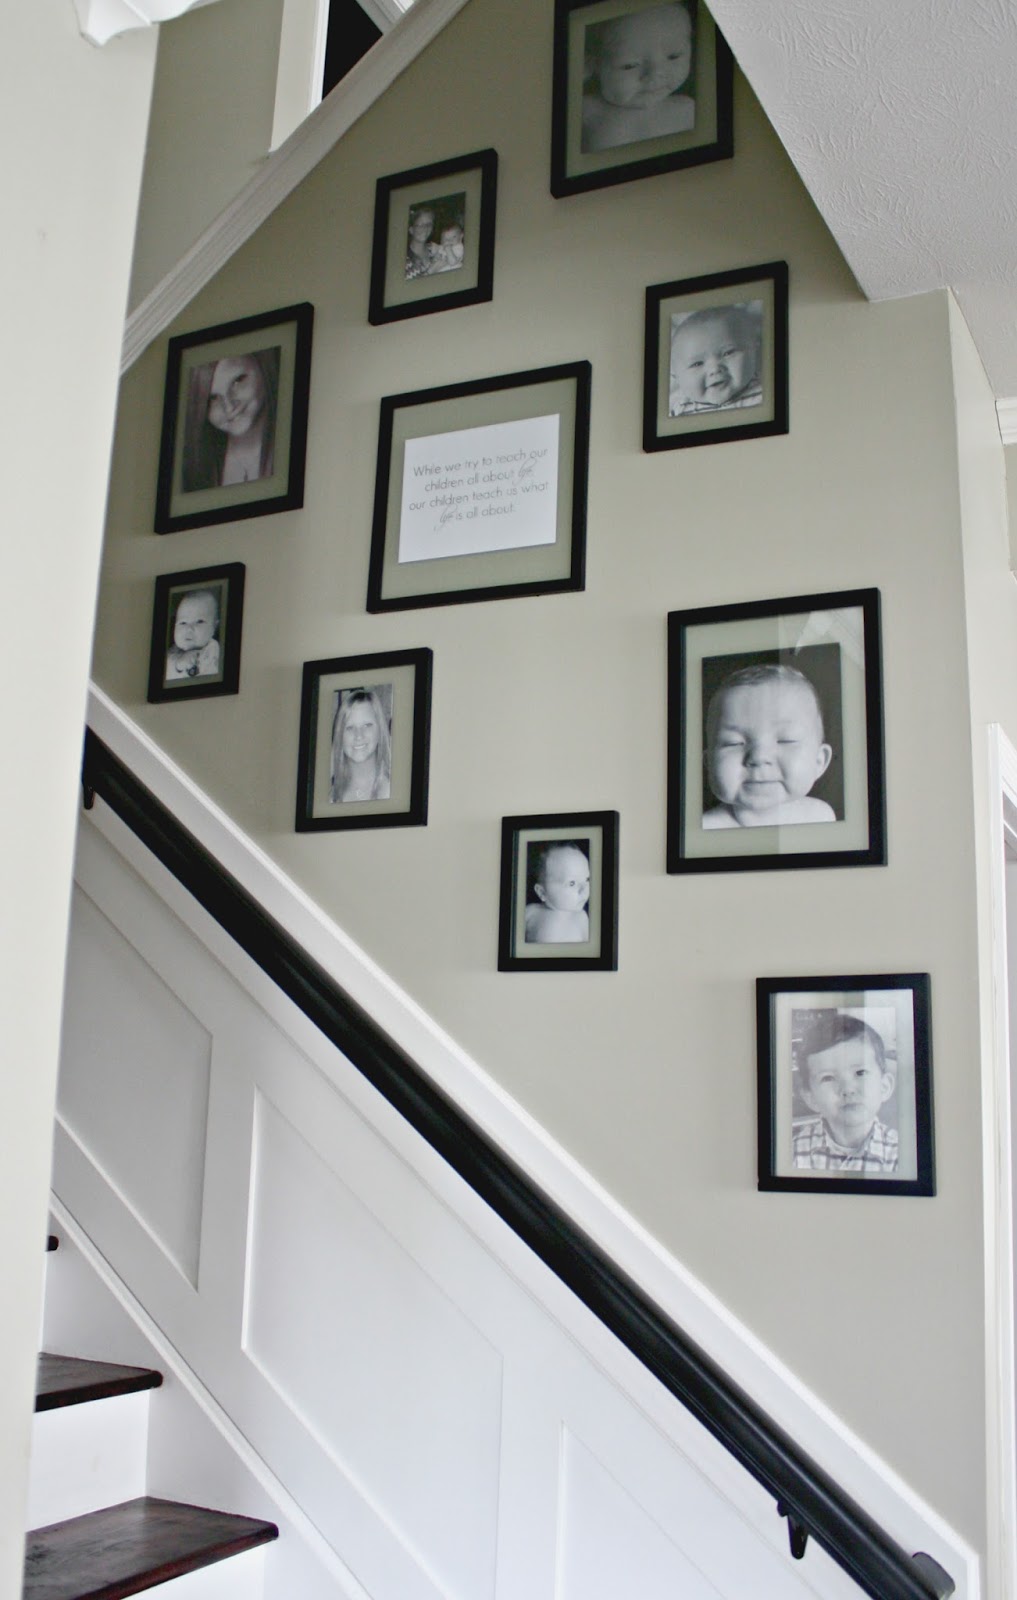 Black Staircase Wall And Handrail | Thrifty Decor Chick | Thrifty Diy, Decor  And Organizing